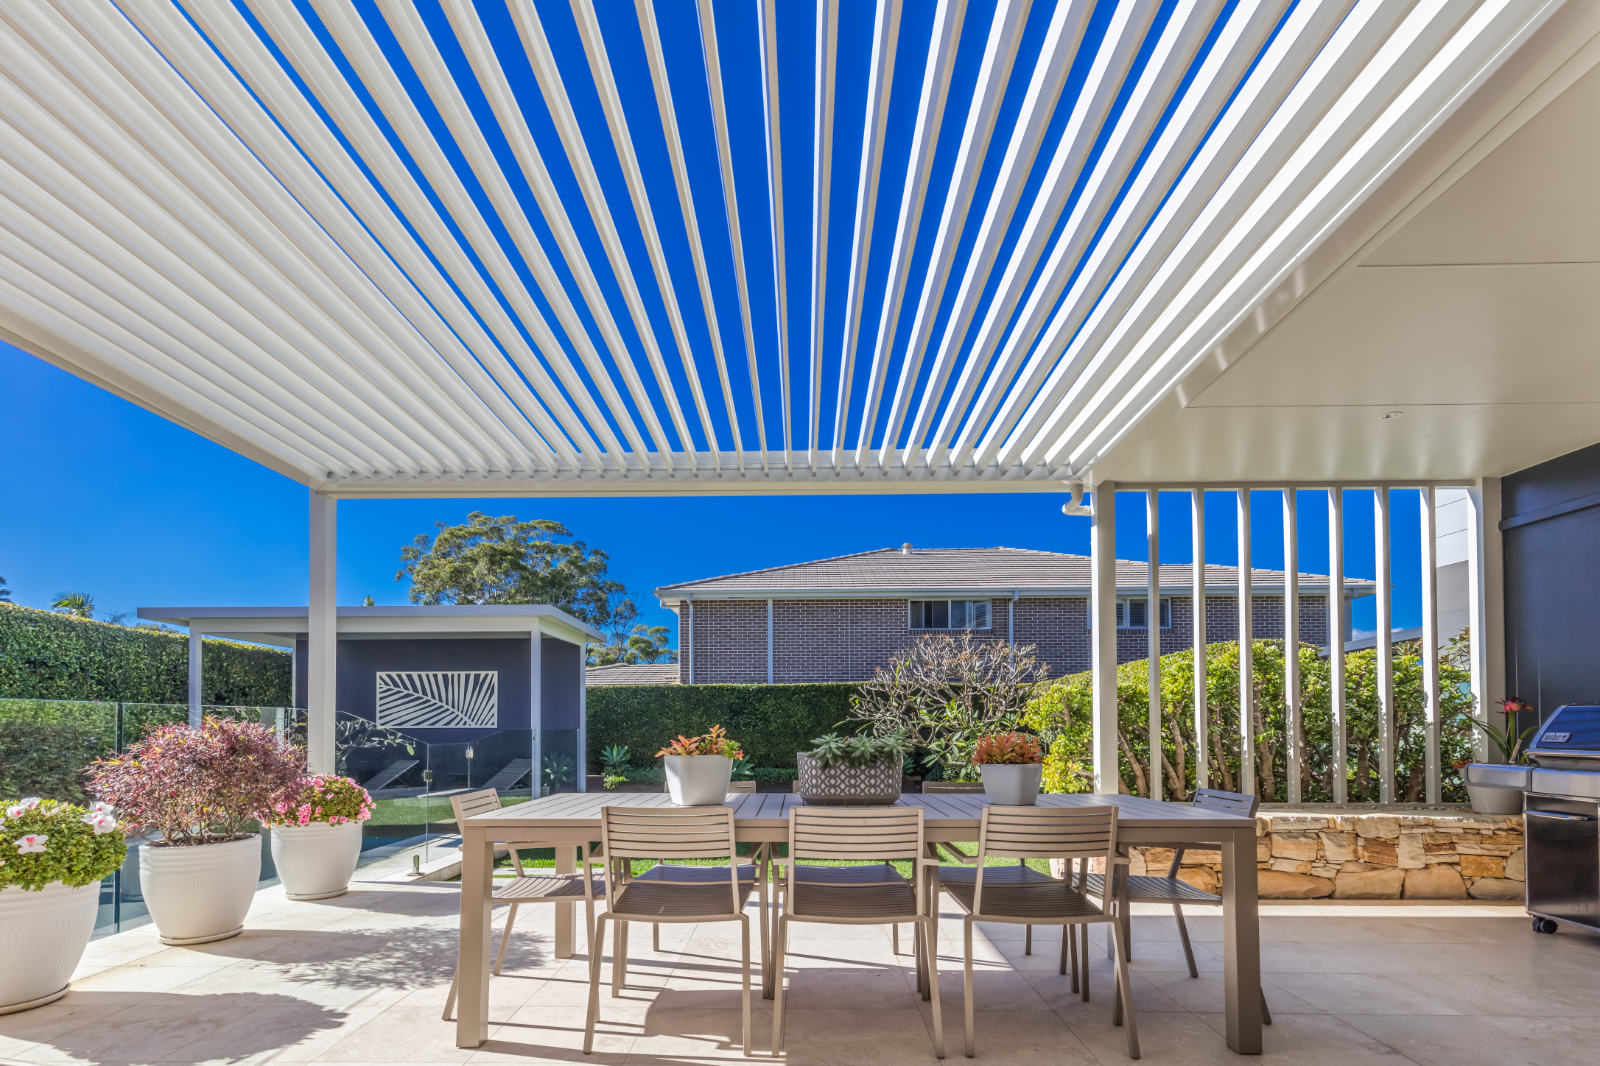 Side profile photos of Gymea Bay pergola, showing the opening roof louvres